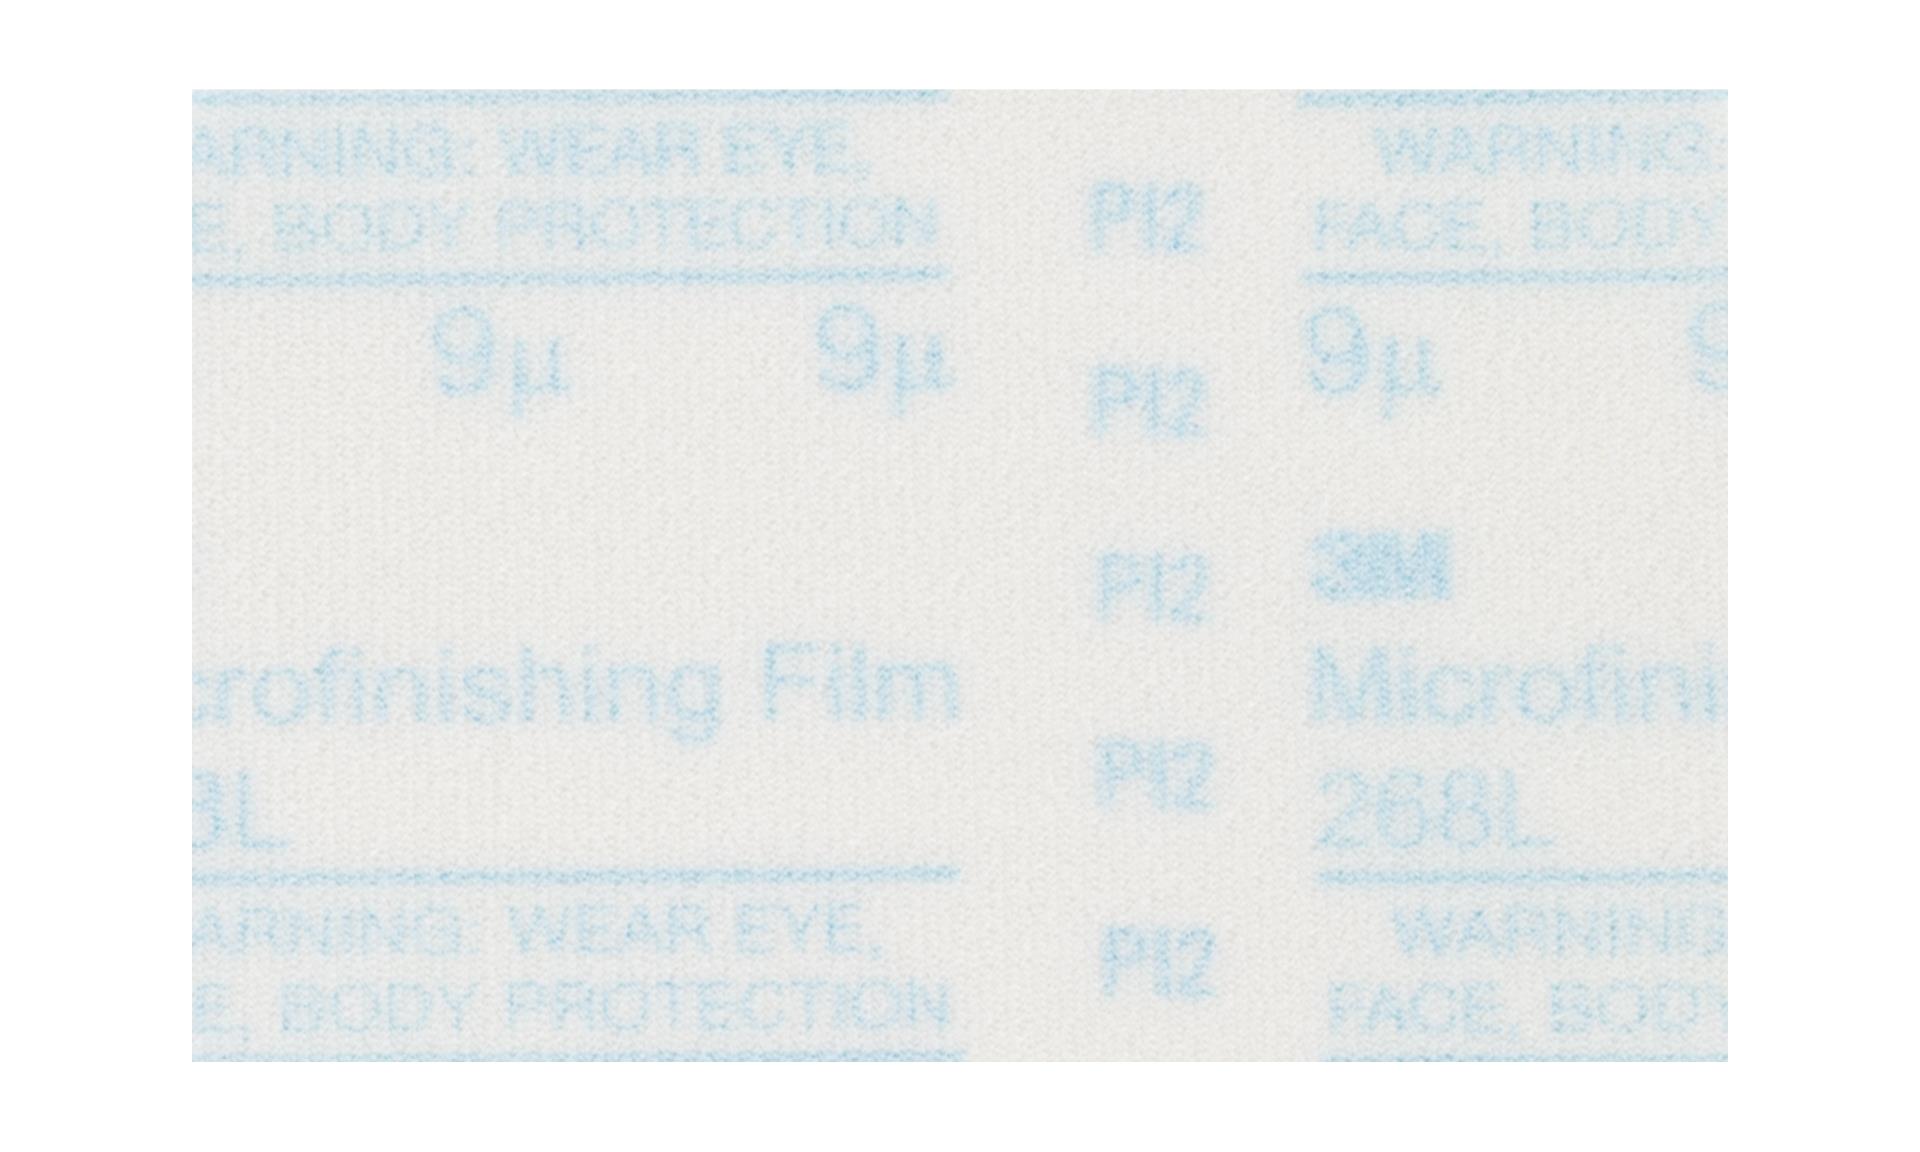 00051111545096 3M™ Microfinishing PSA Film Disc 268L, Mic, Type D,  Light Blue, in x NH, Die 300V, 100 per inner, 1000 per case Aircraft  products 3M 9377868